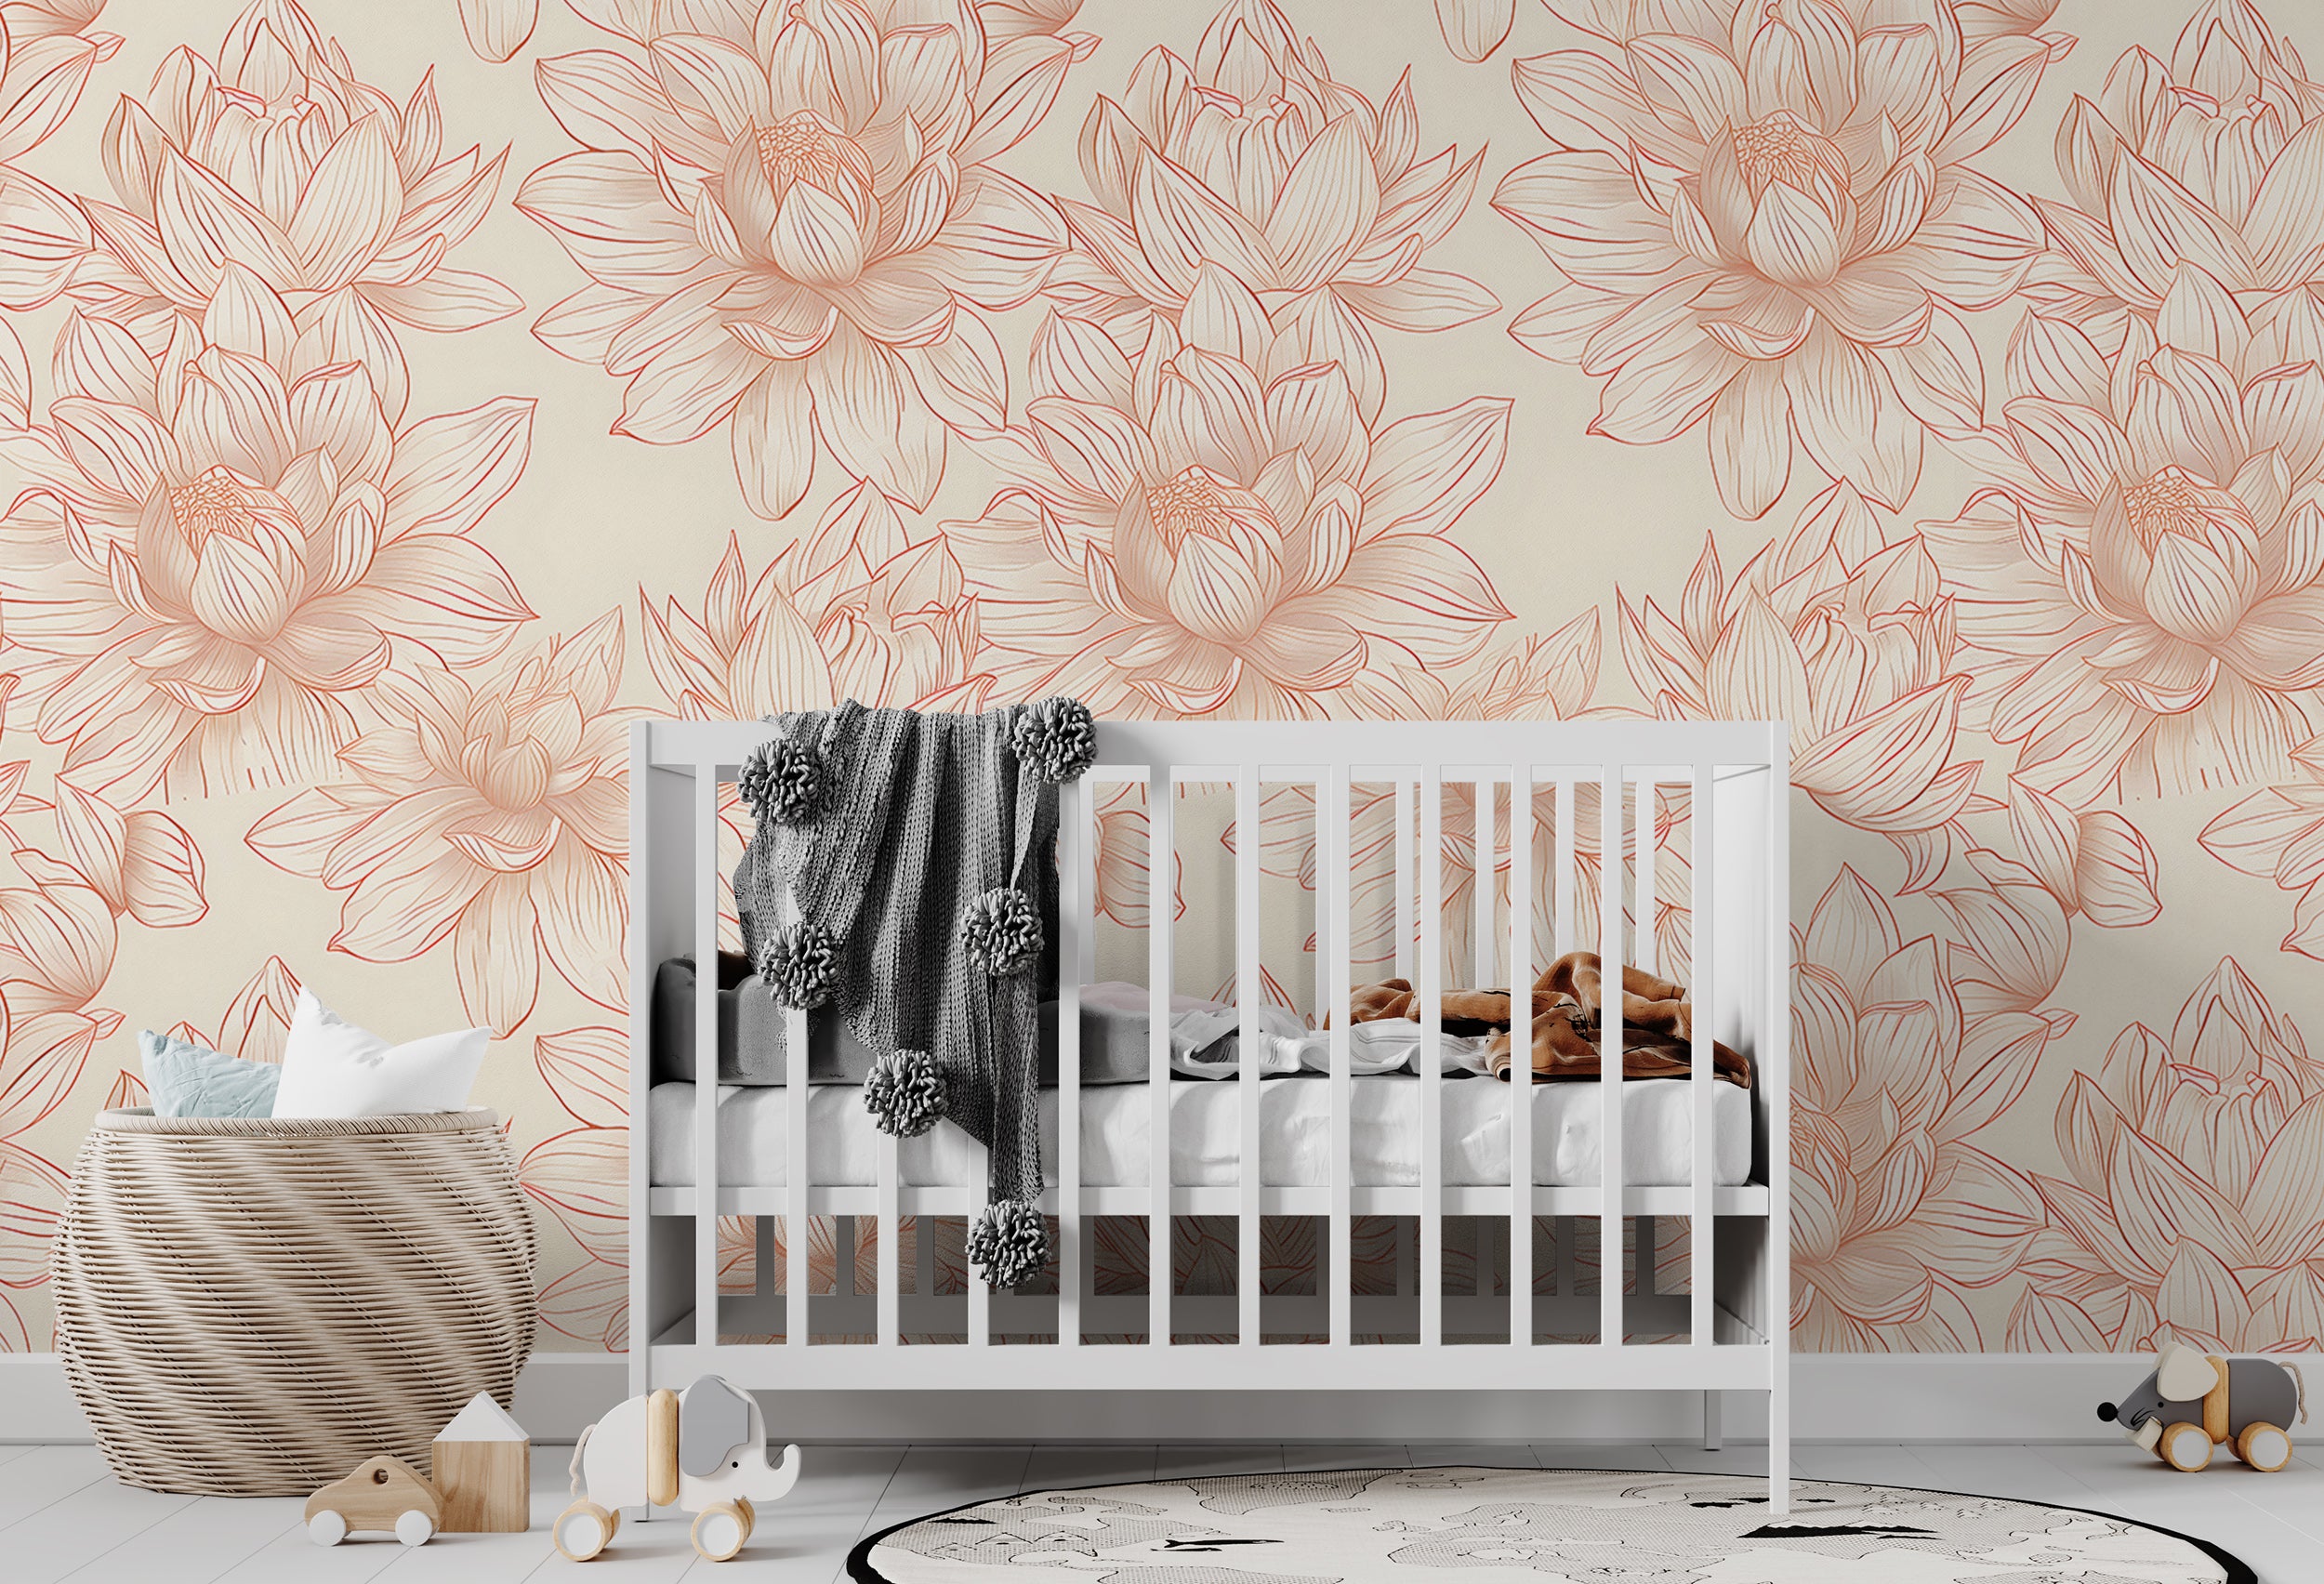 Lotus Flowers Wallpaper, Peel and Stick Pastel Colors Floral Wallpaper, Dusty Rose and Beige Botanical Wall Decor, Removable Flower Pattern Decal